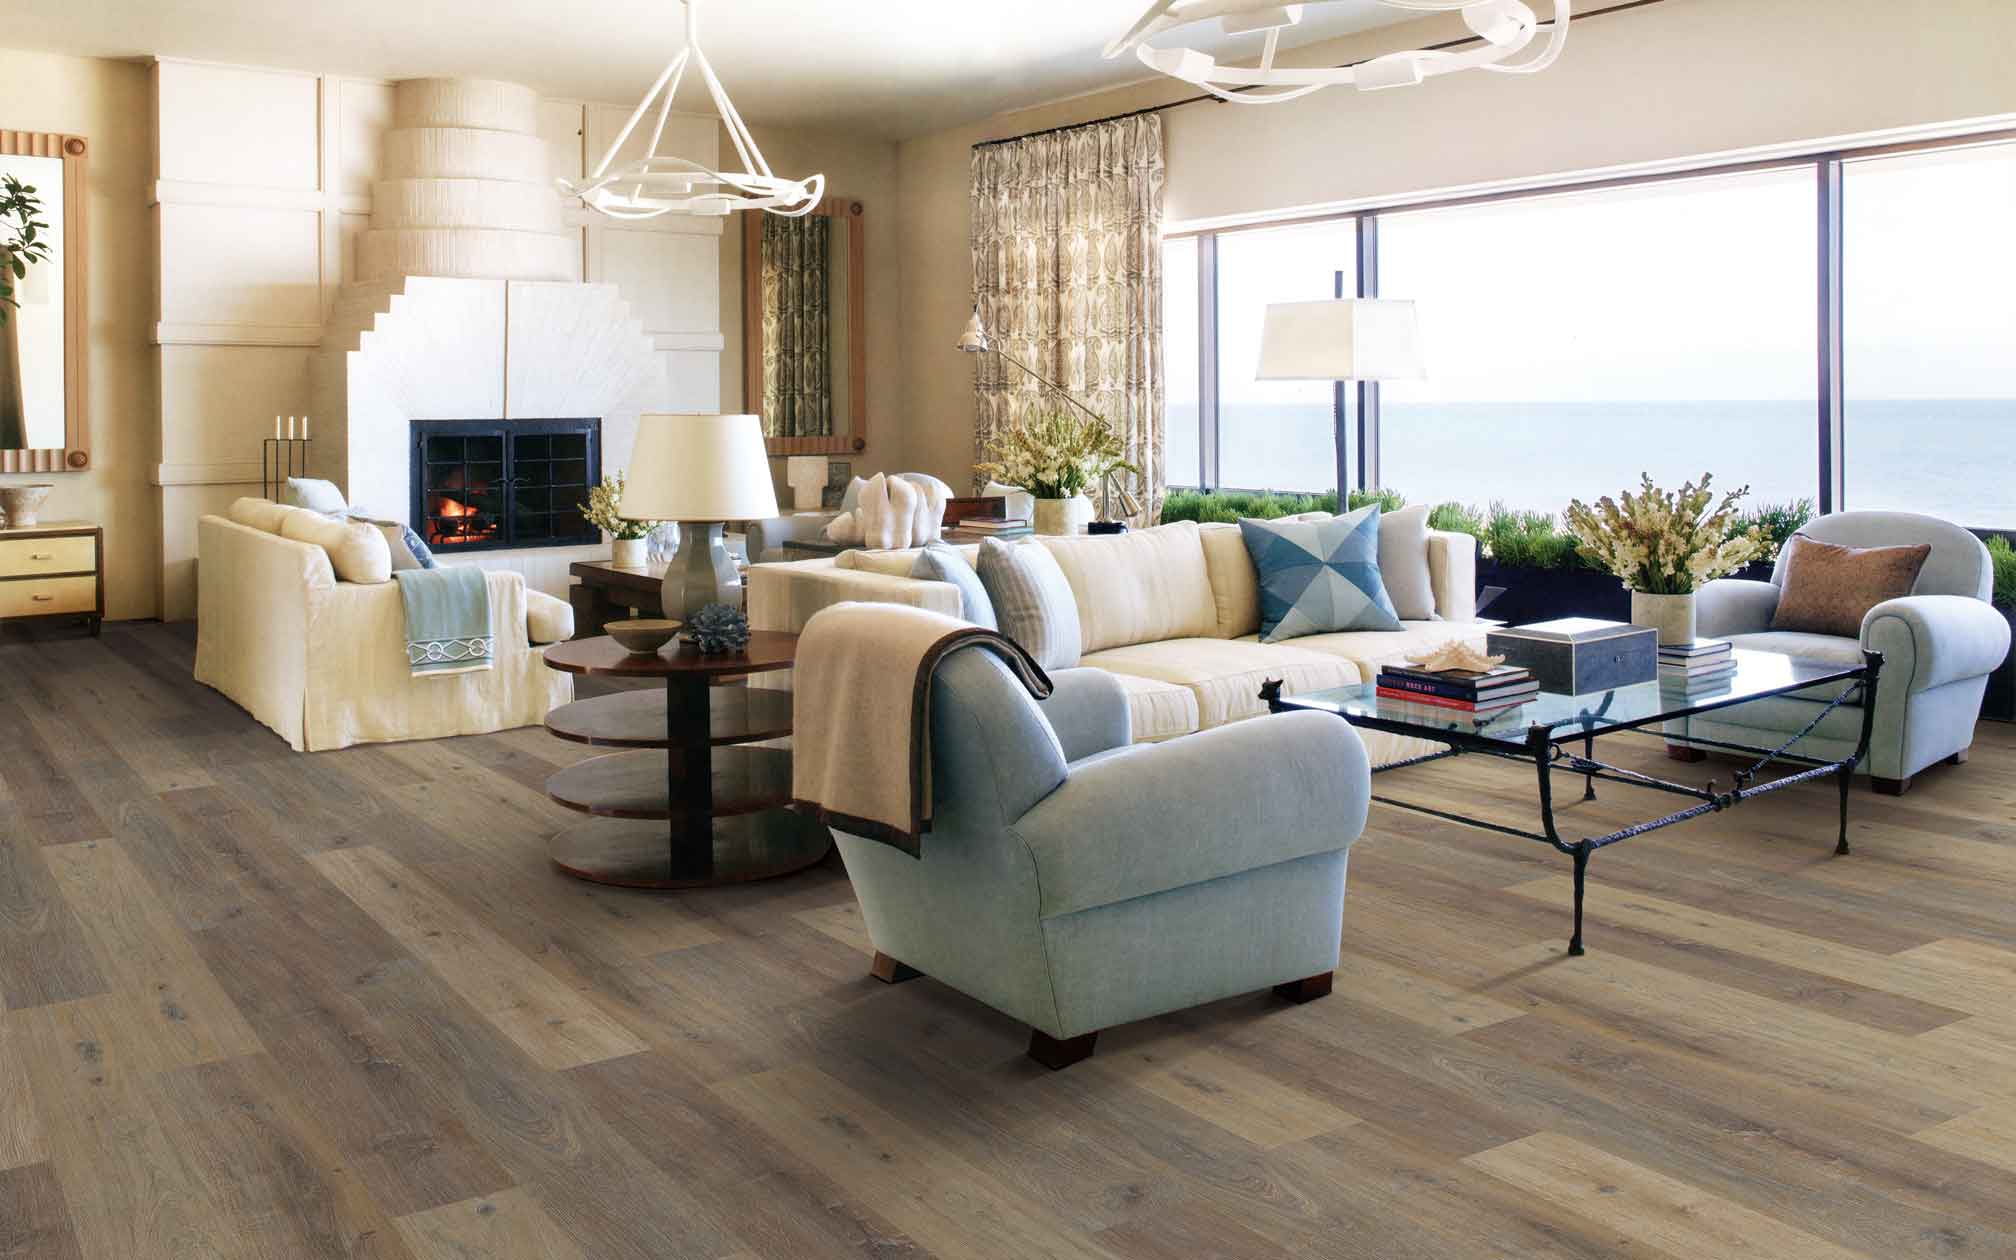 WHAT ARE THE VARIOUS LAMINATE FLOORING OPTIONS TO CHOOSE?